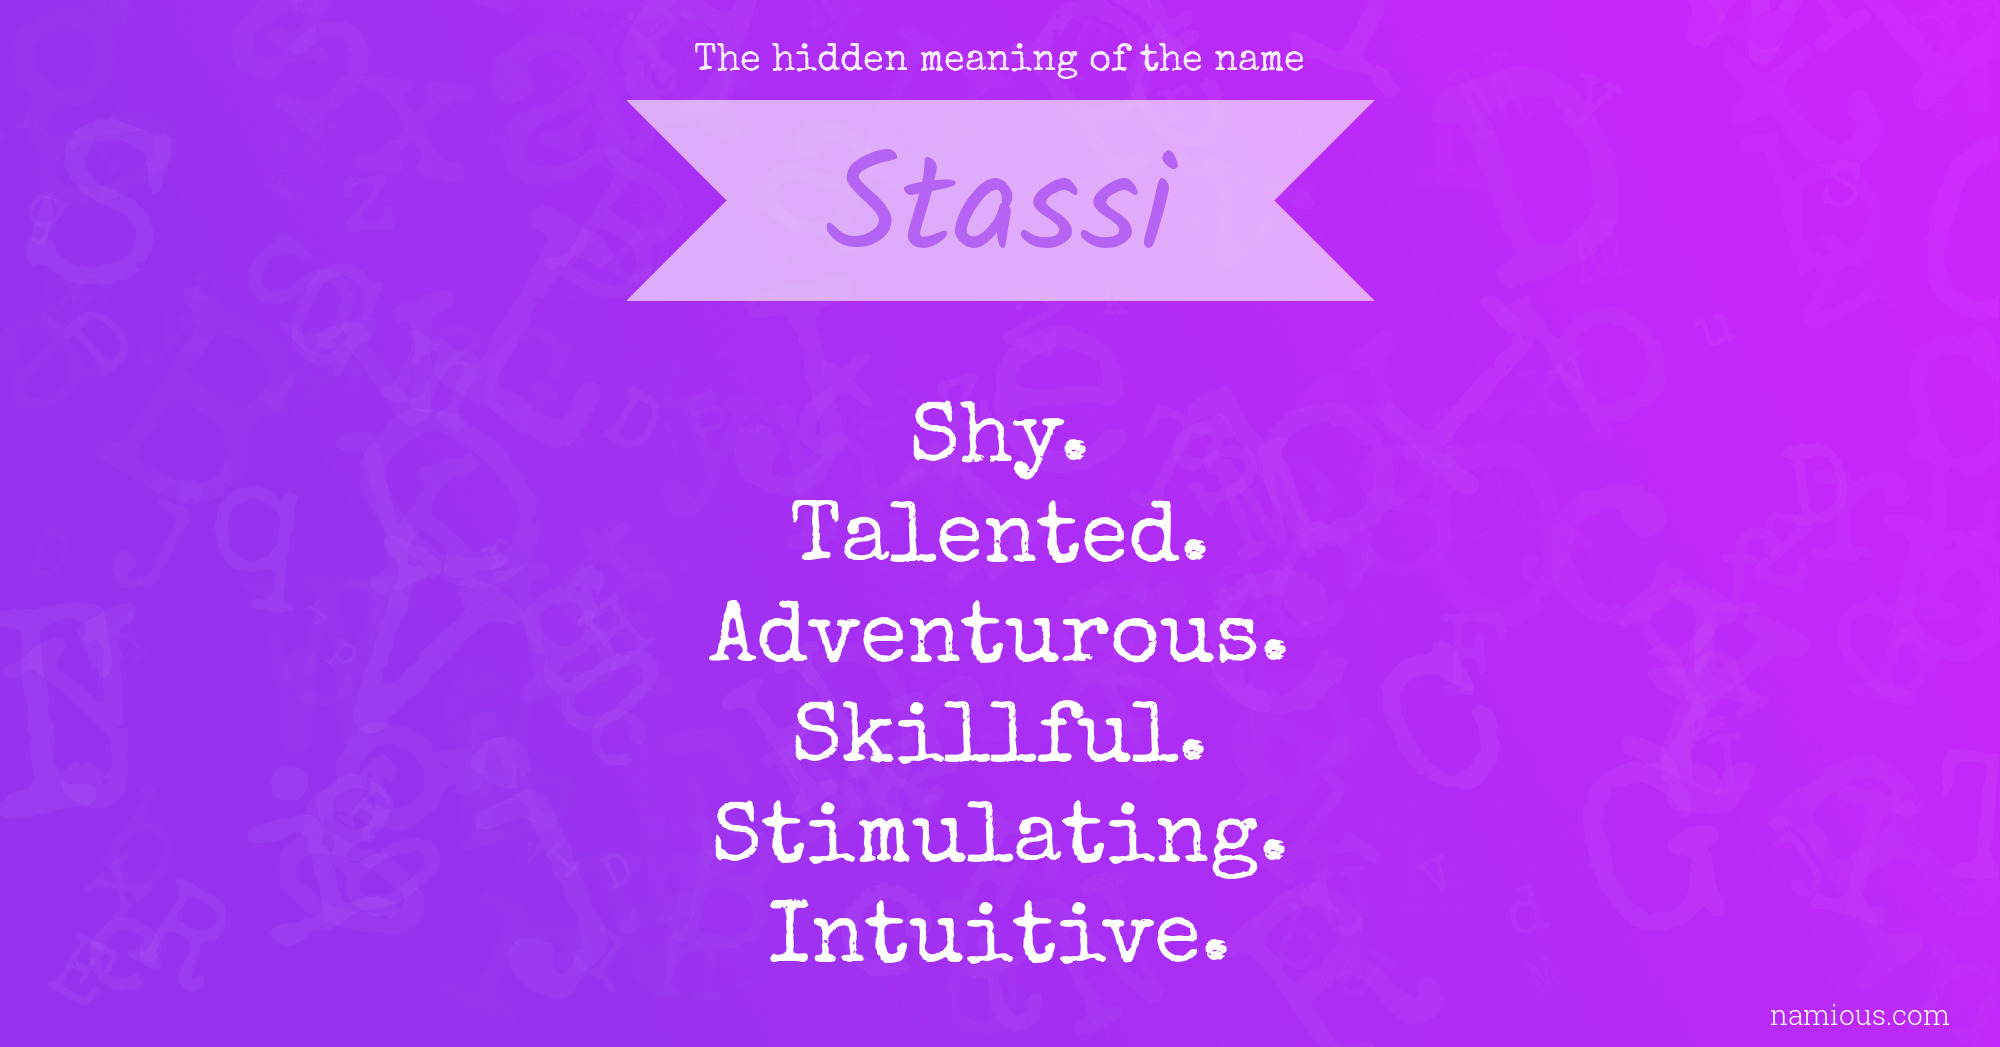 The hidden meaning of the name Stassi